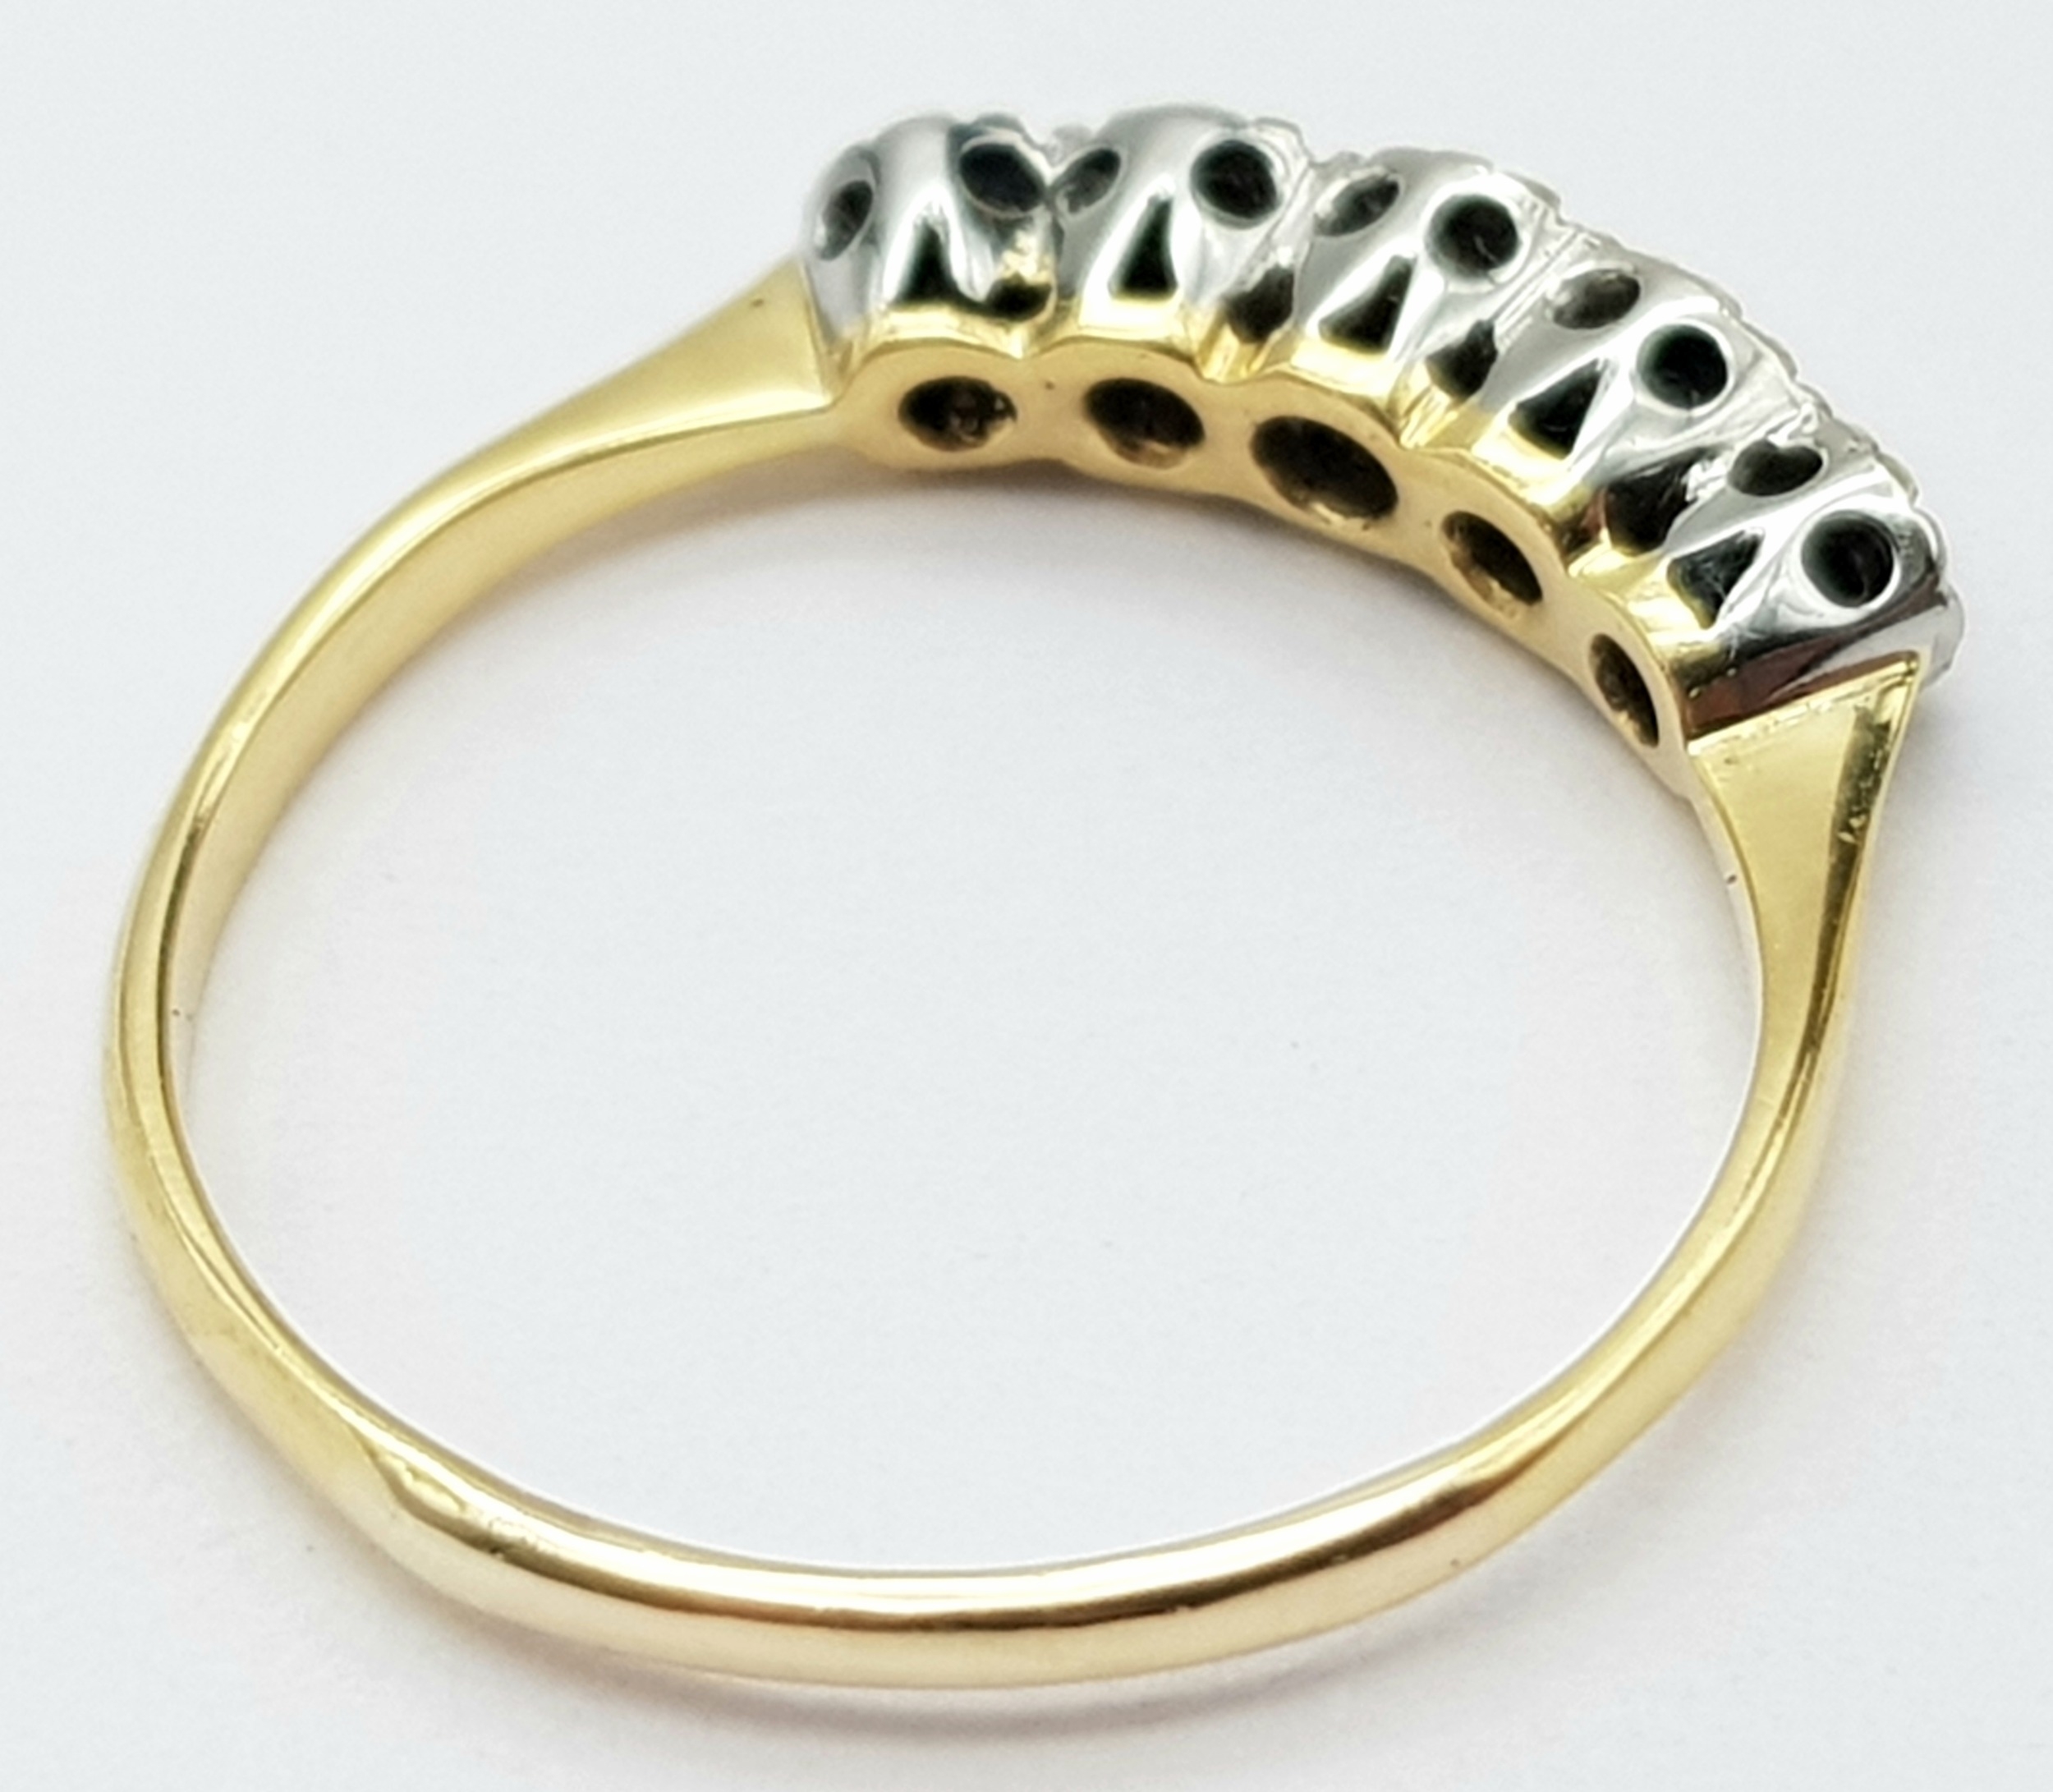 AN 18K YELLOW GOLD VINTAGE DIAMOND 5 STONE RING, Size J, 1.6g total weight. Ref: SC 8066 - Image 4 of 5